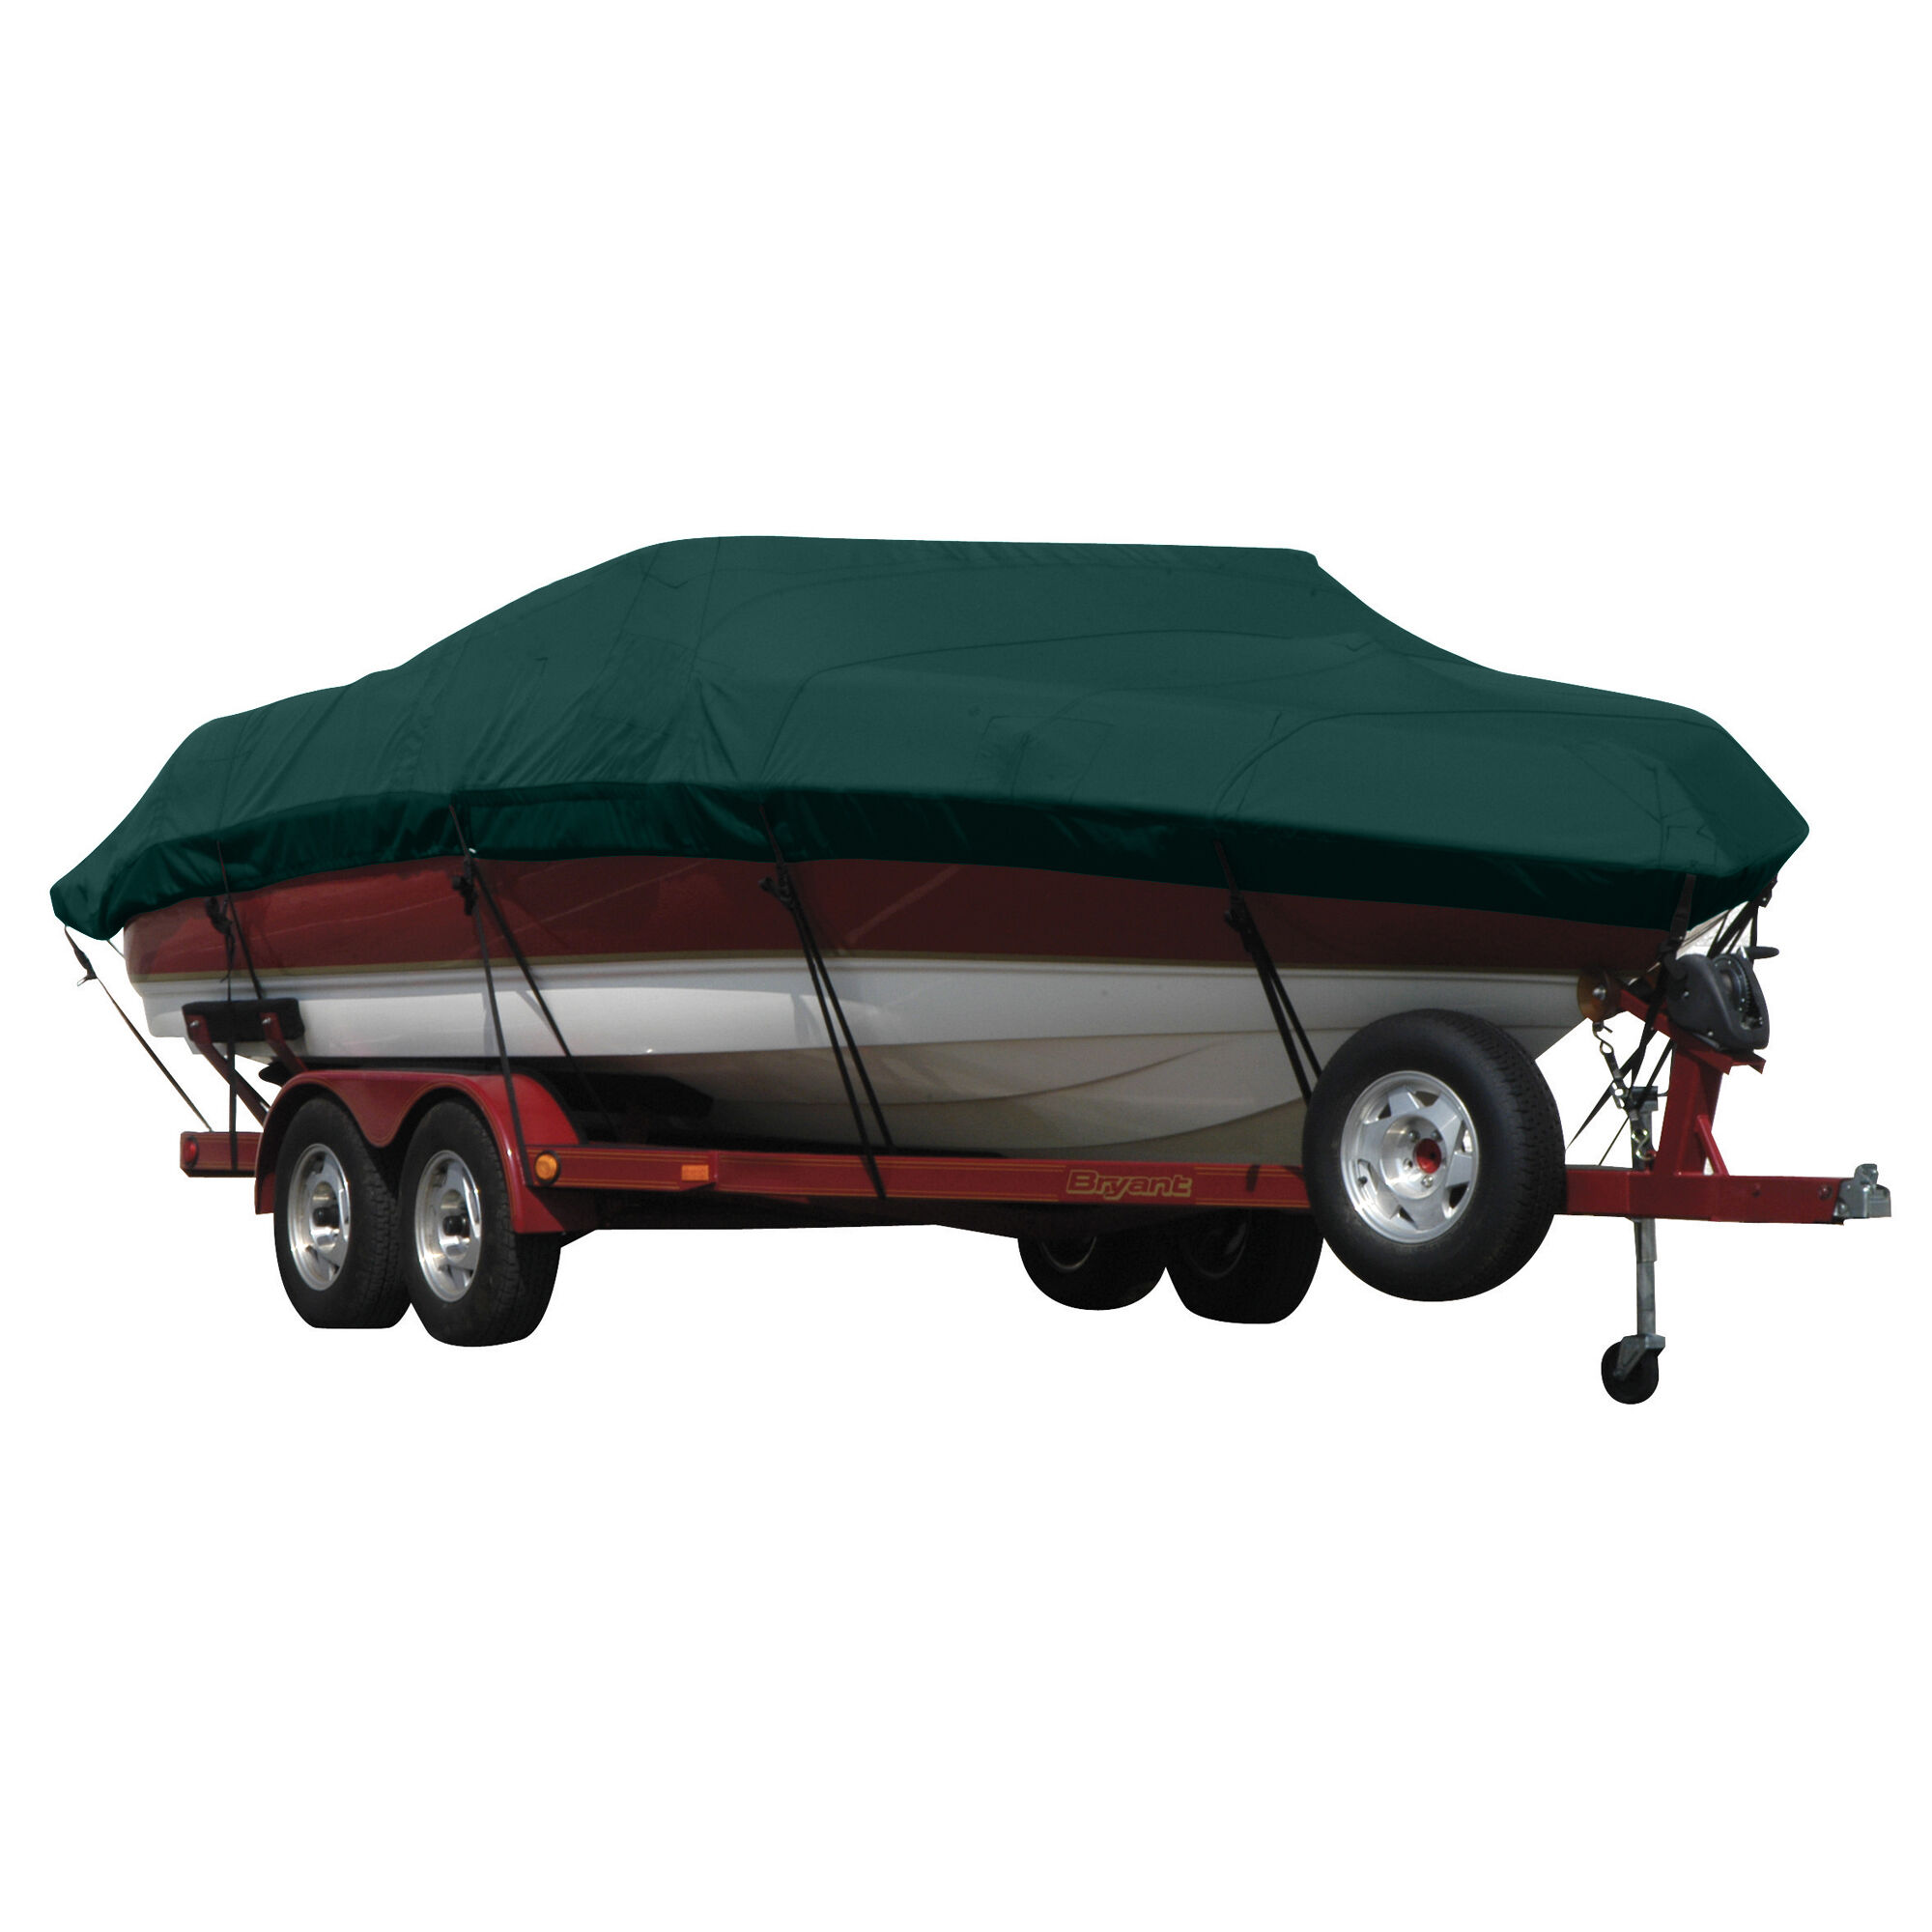 Covermate Exact Fit Sunbrella Boat Cover for Campion Chase 800 Chase 800 I/O. Forest Green